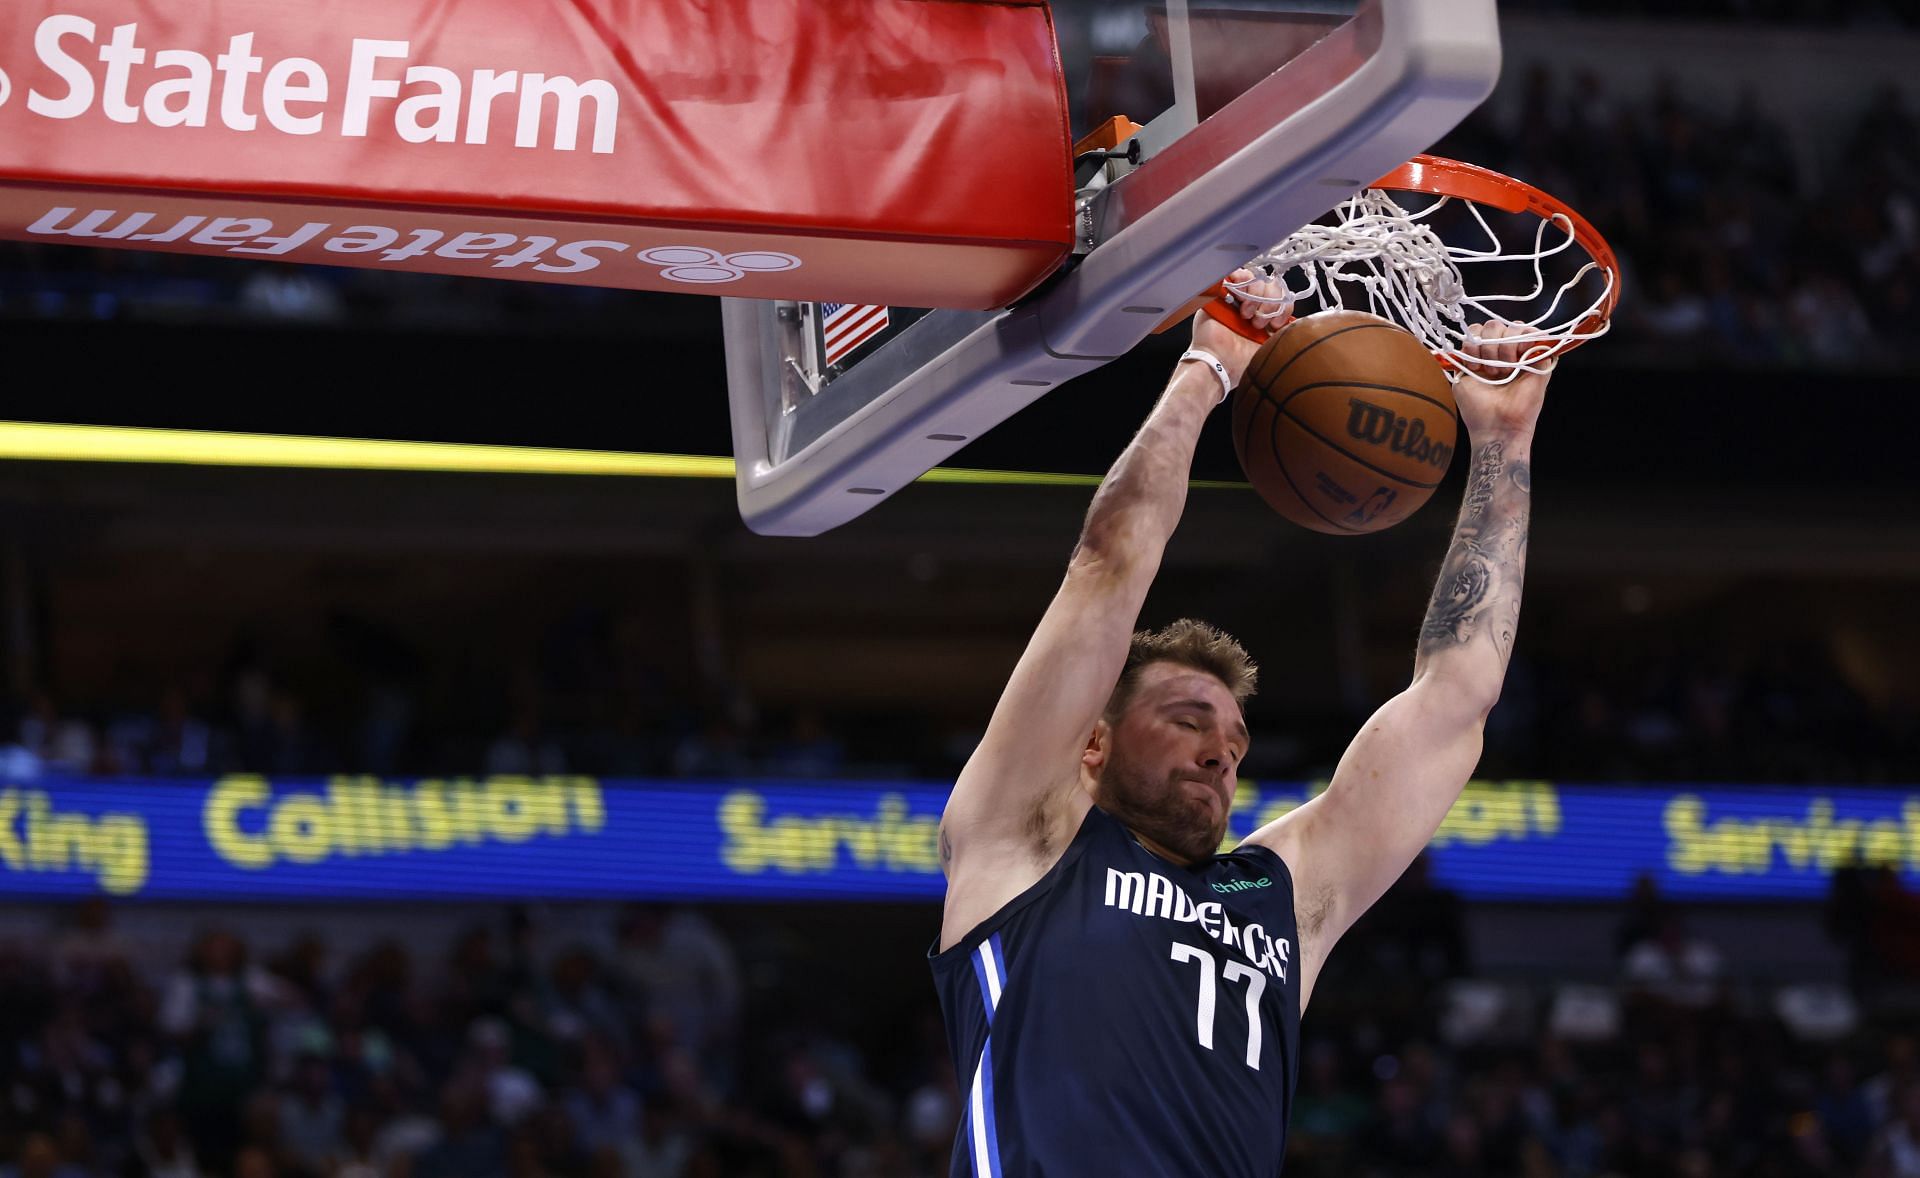 Luka Doncic #77 of the Dallas Mavericks slam dunks against the Phoenix Suns during Game Six of the 2022 NBA Playoffs Western Conference Semifinals at American Airlines Center on May 12, 2022 in Dallas, Texas.